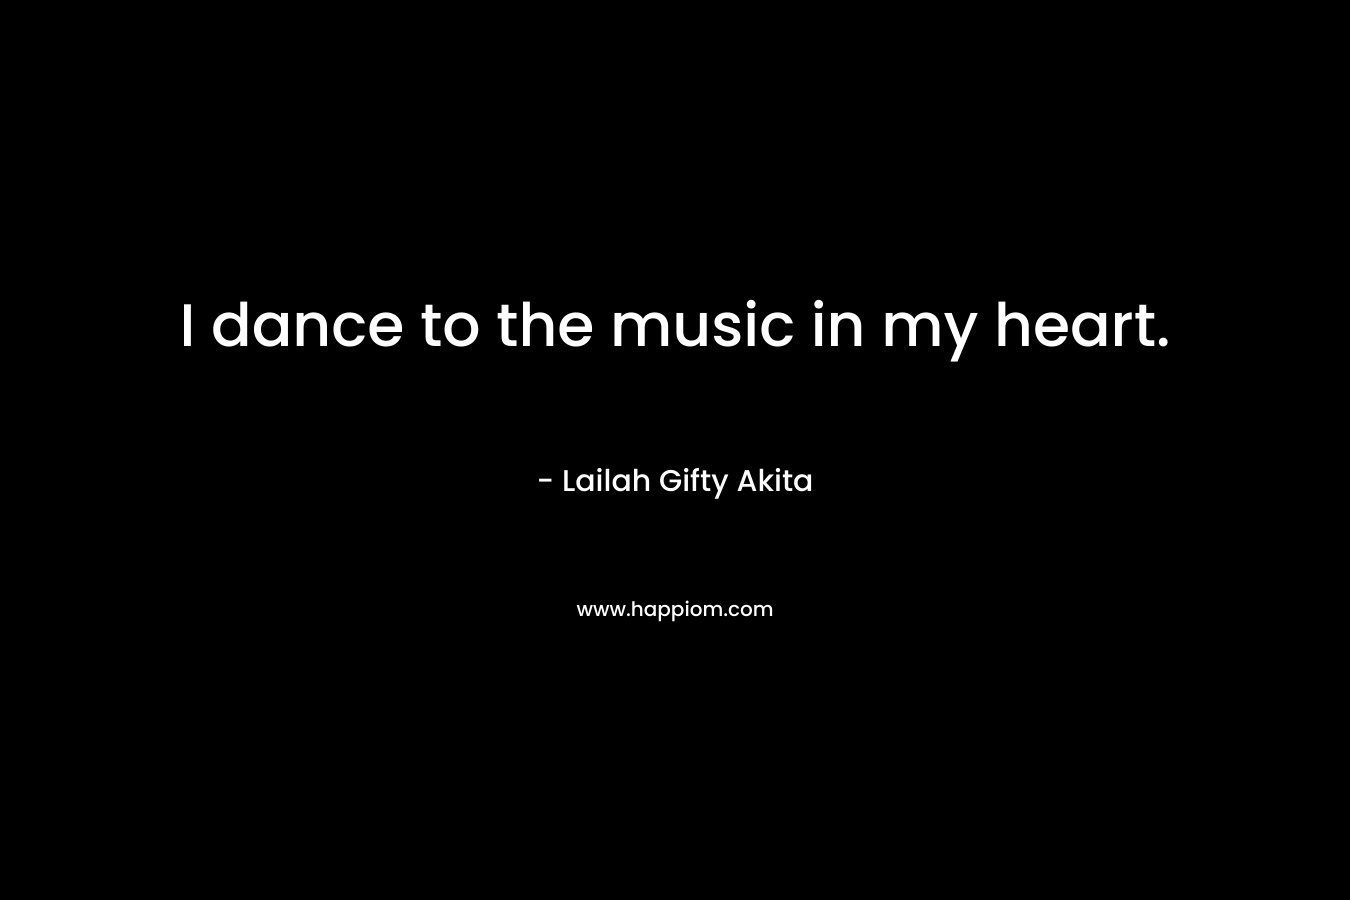 I dance to the music in my heart.